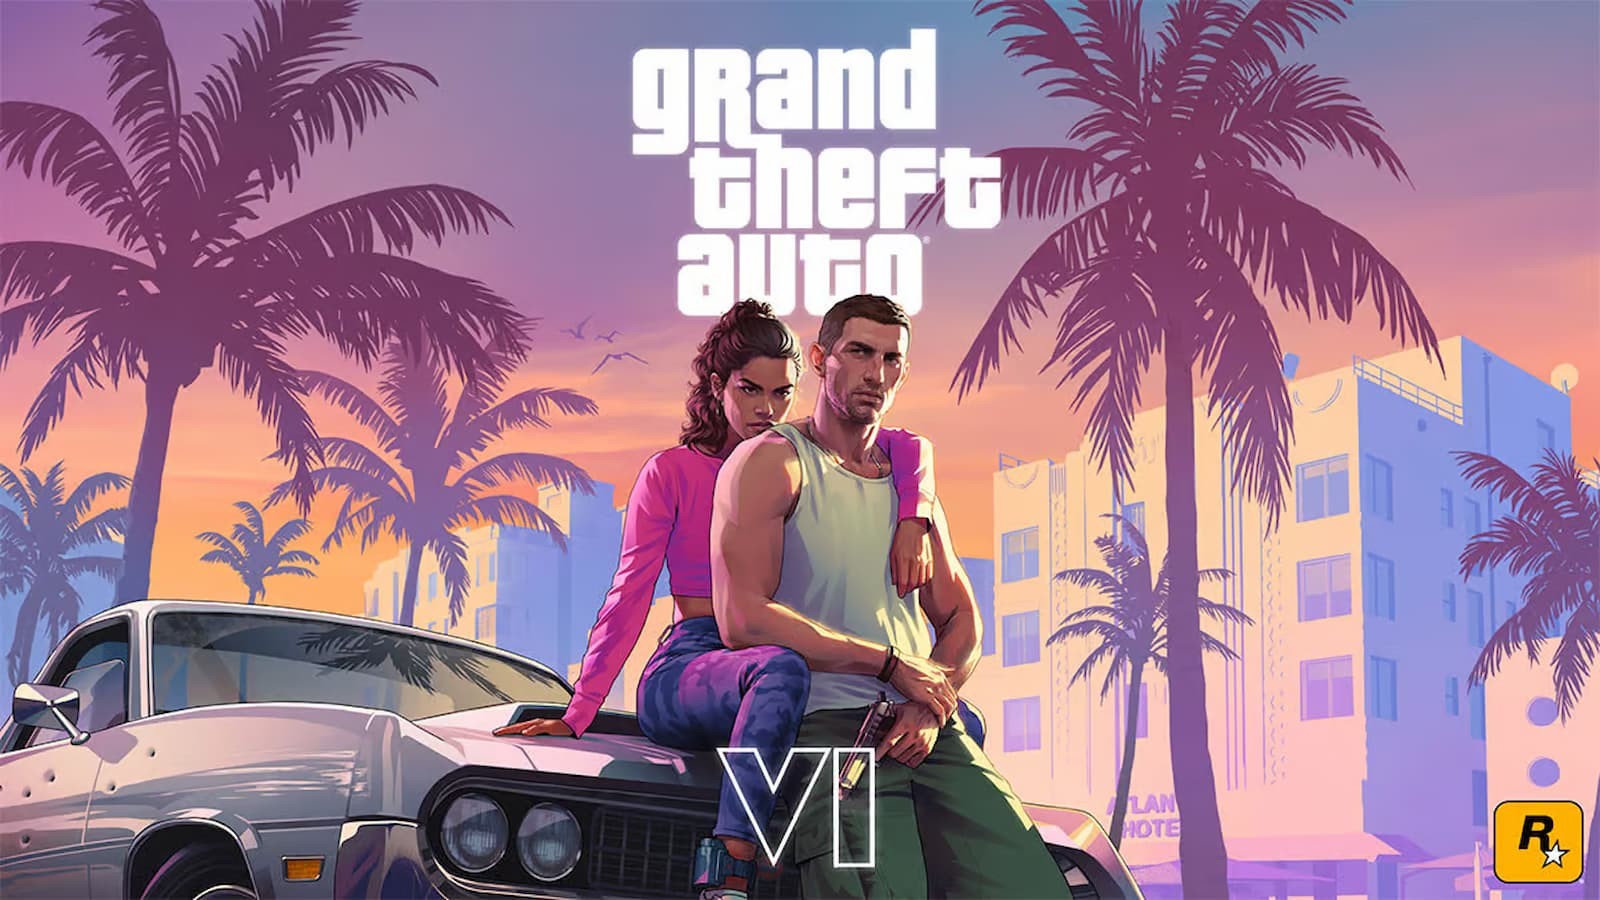 Grand Theft Auto 6 has seen several leaks since the past couple of years.